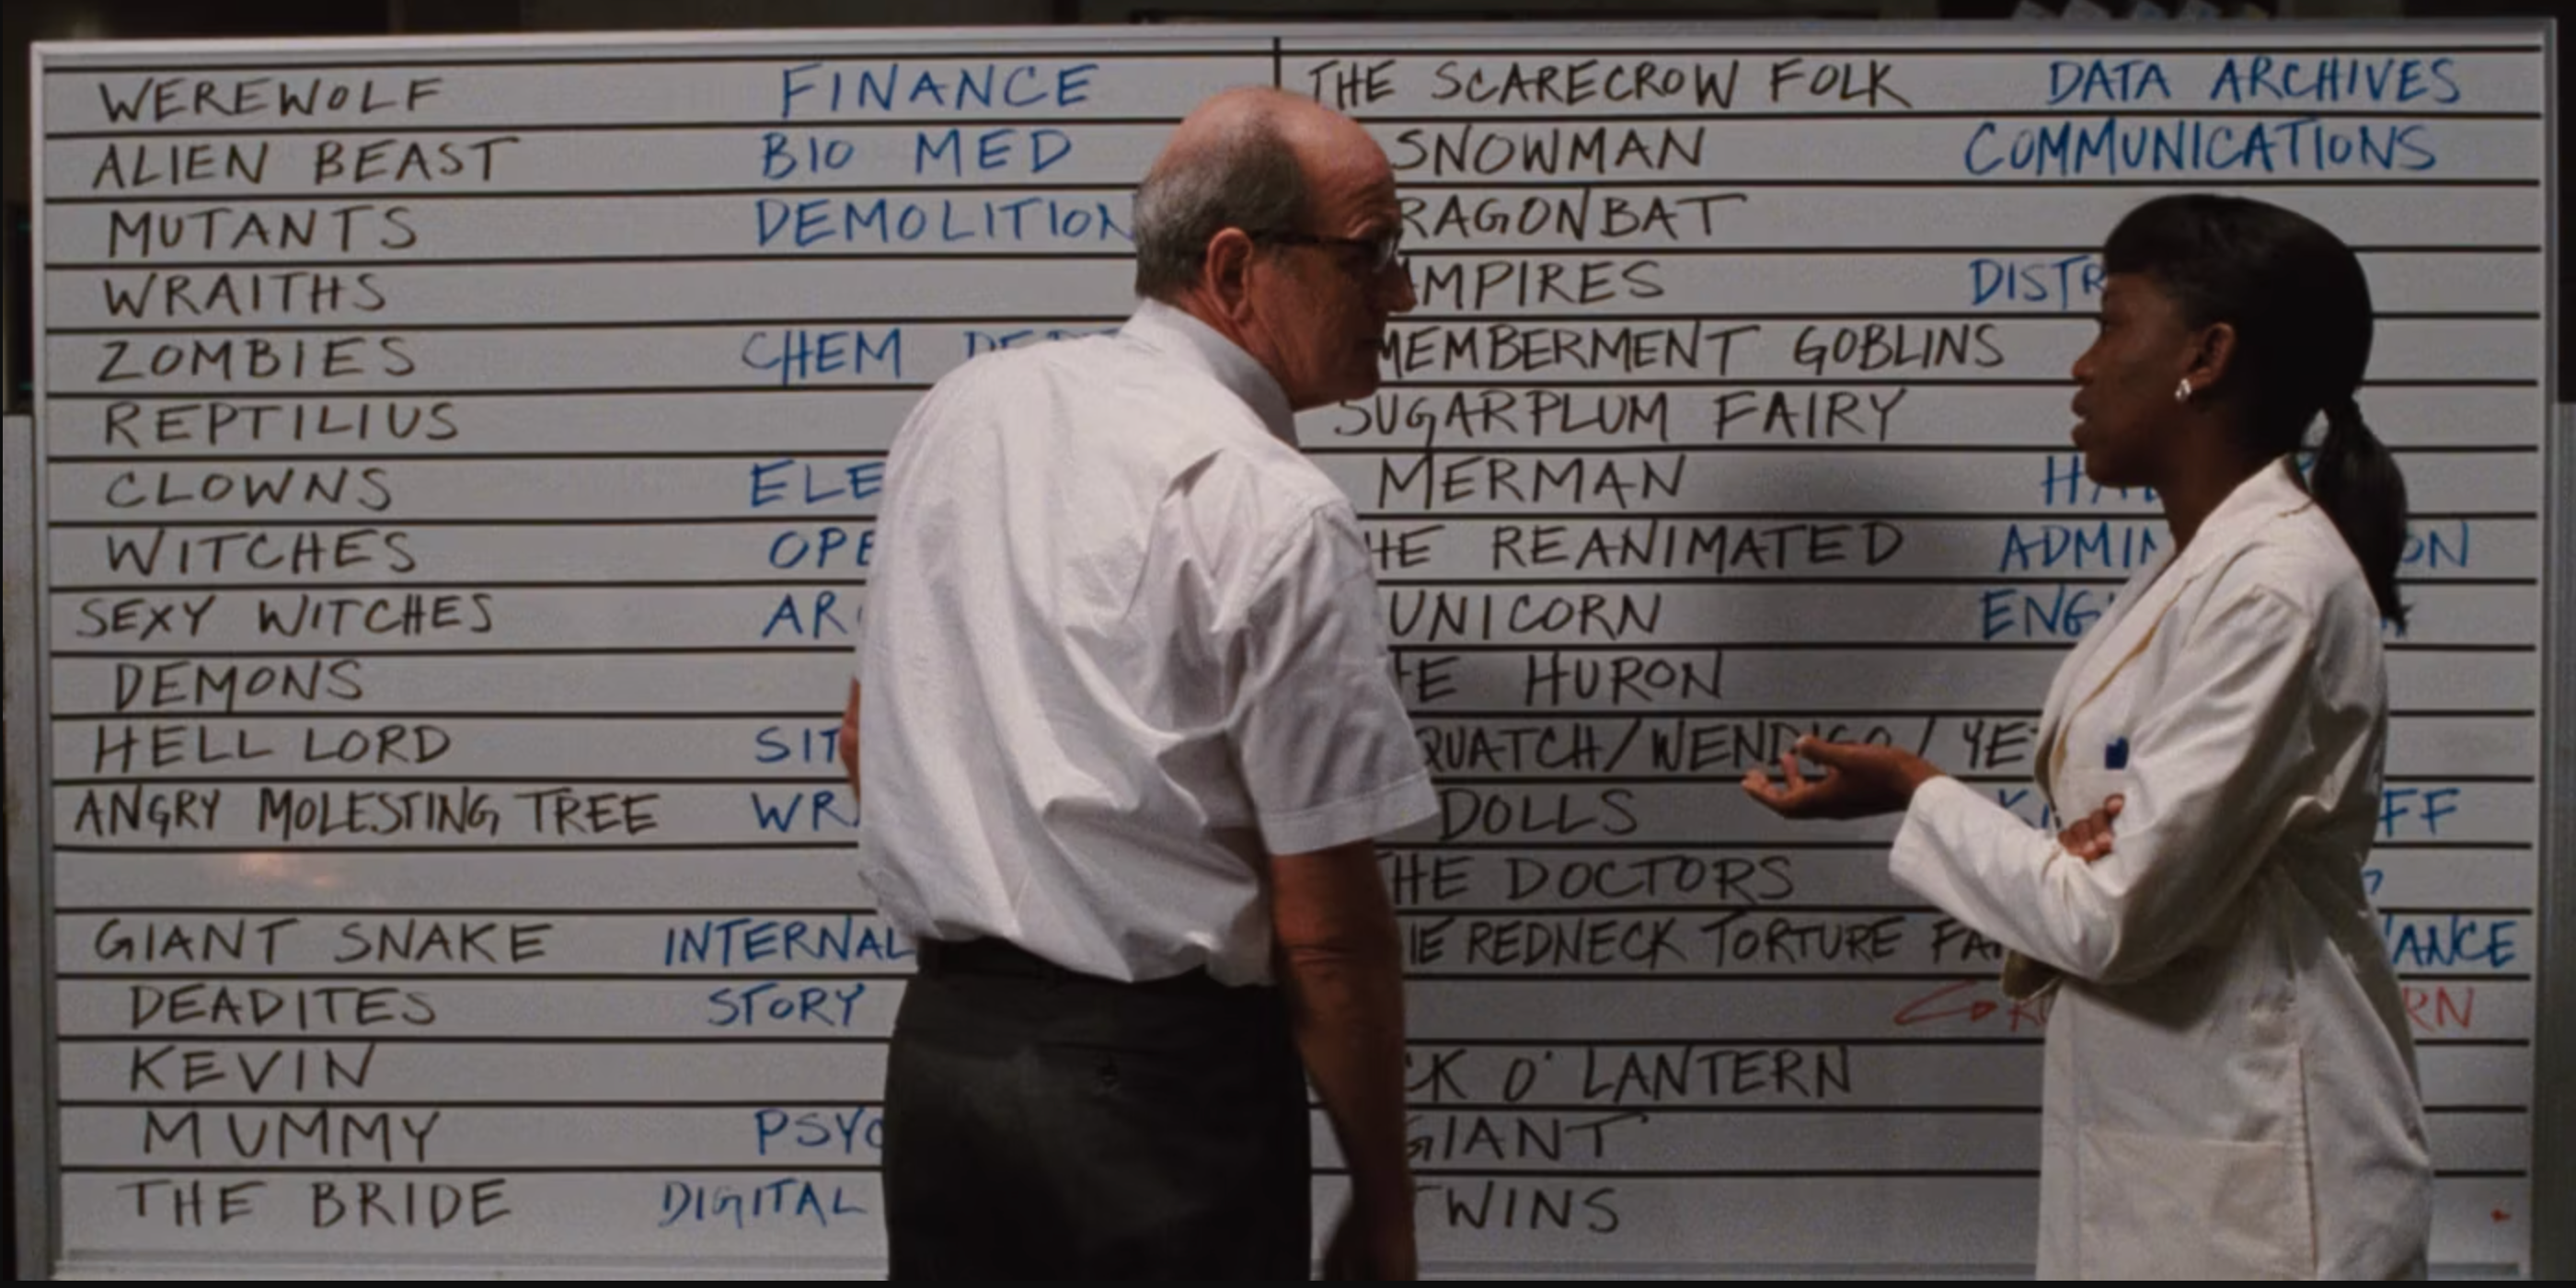 The Whiteboard listing some of the monsters in Cabin in the Woods